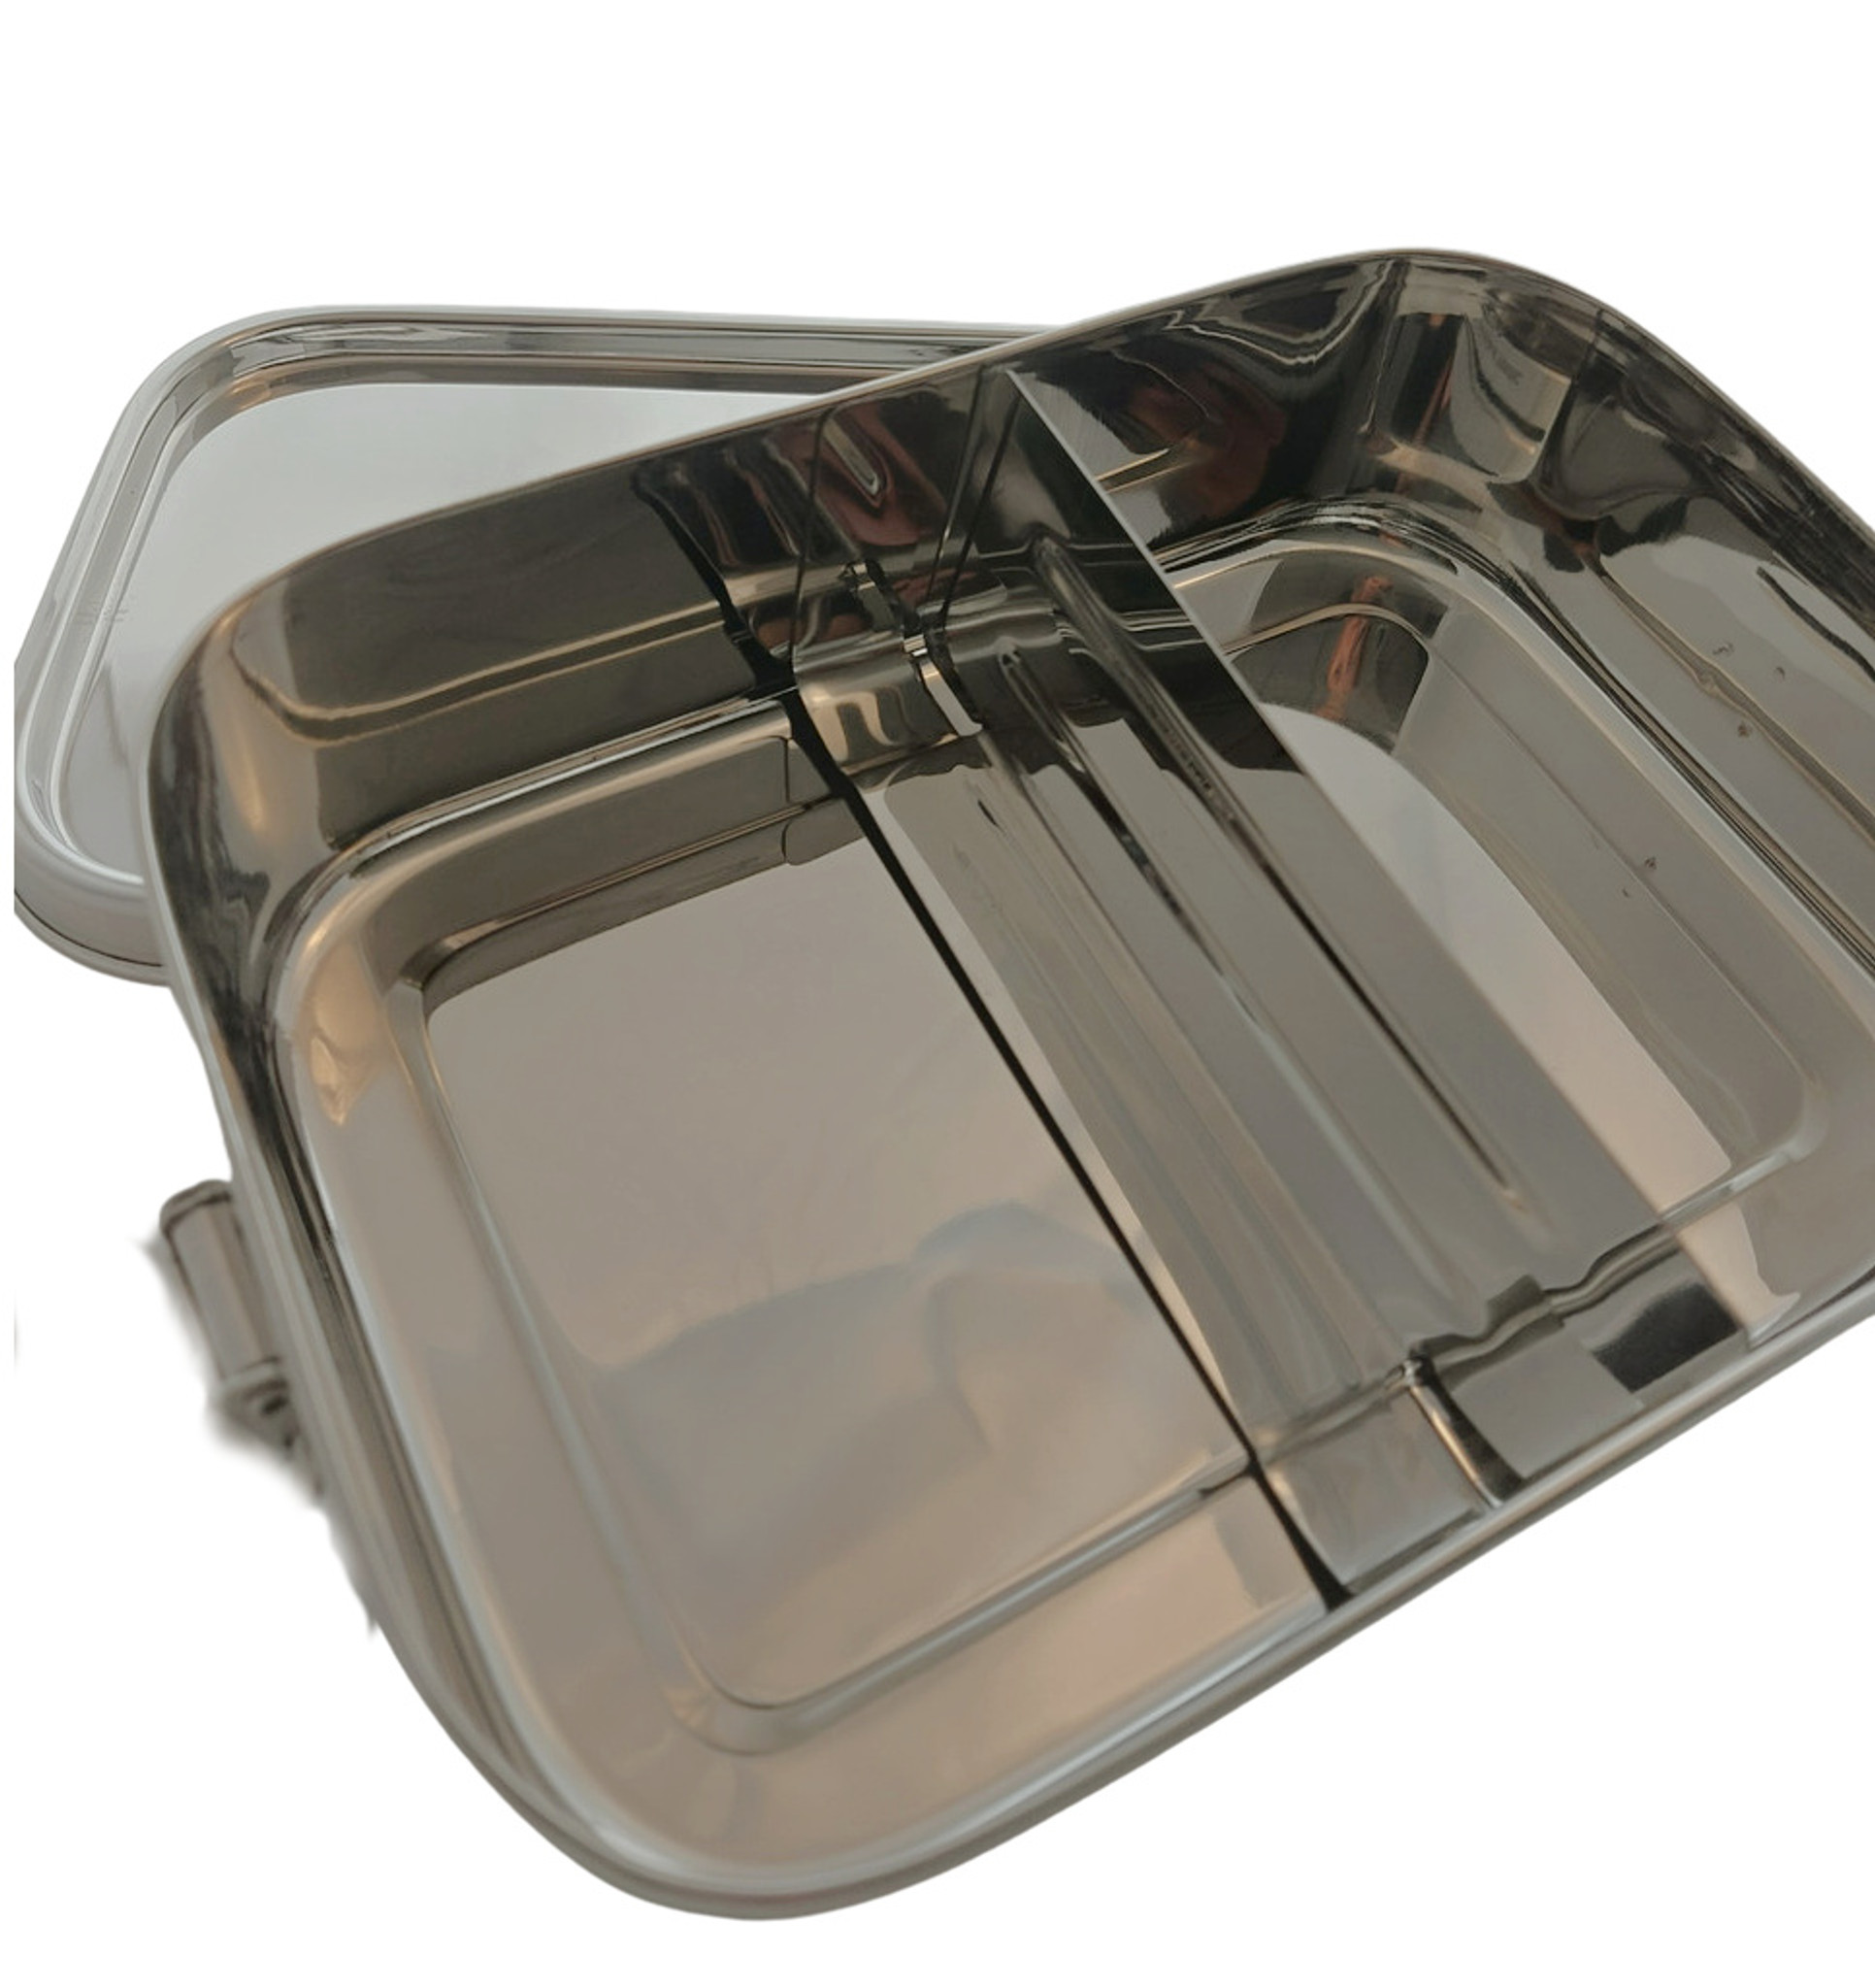 Removable stainless steel divider for plastic-free rectangular container